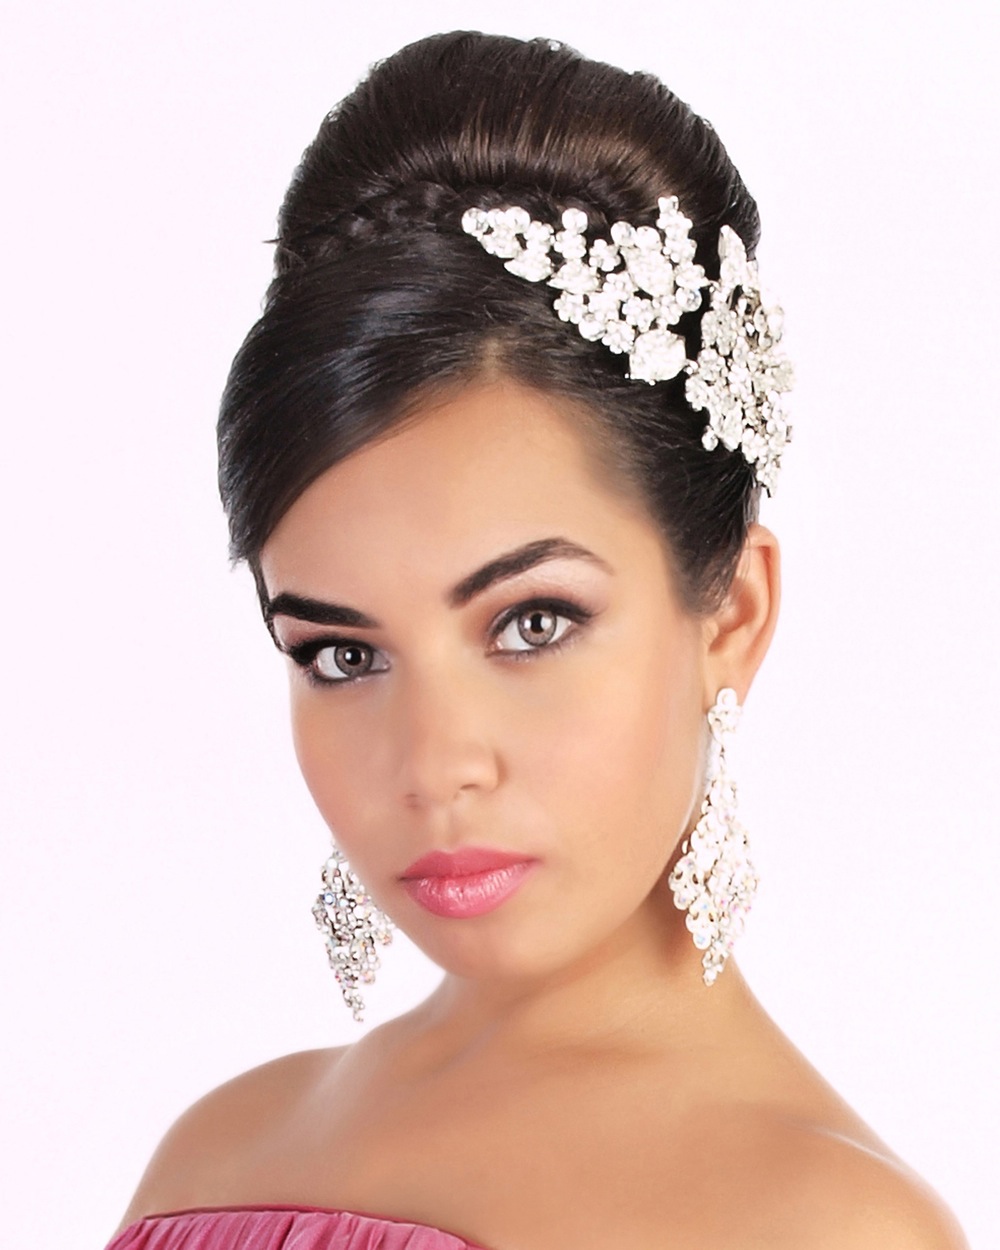 Makeup for quinceanera